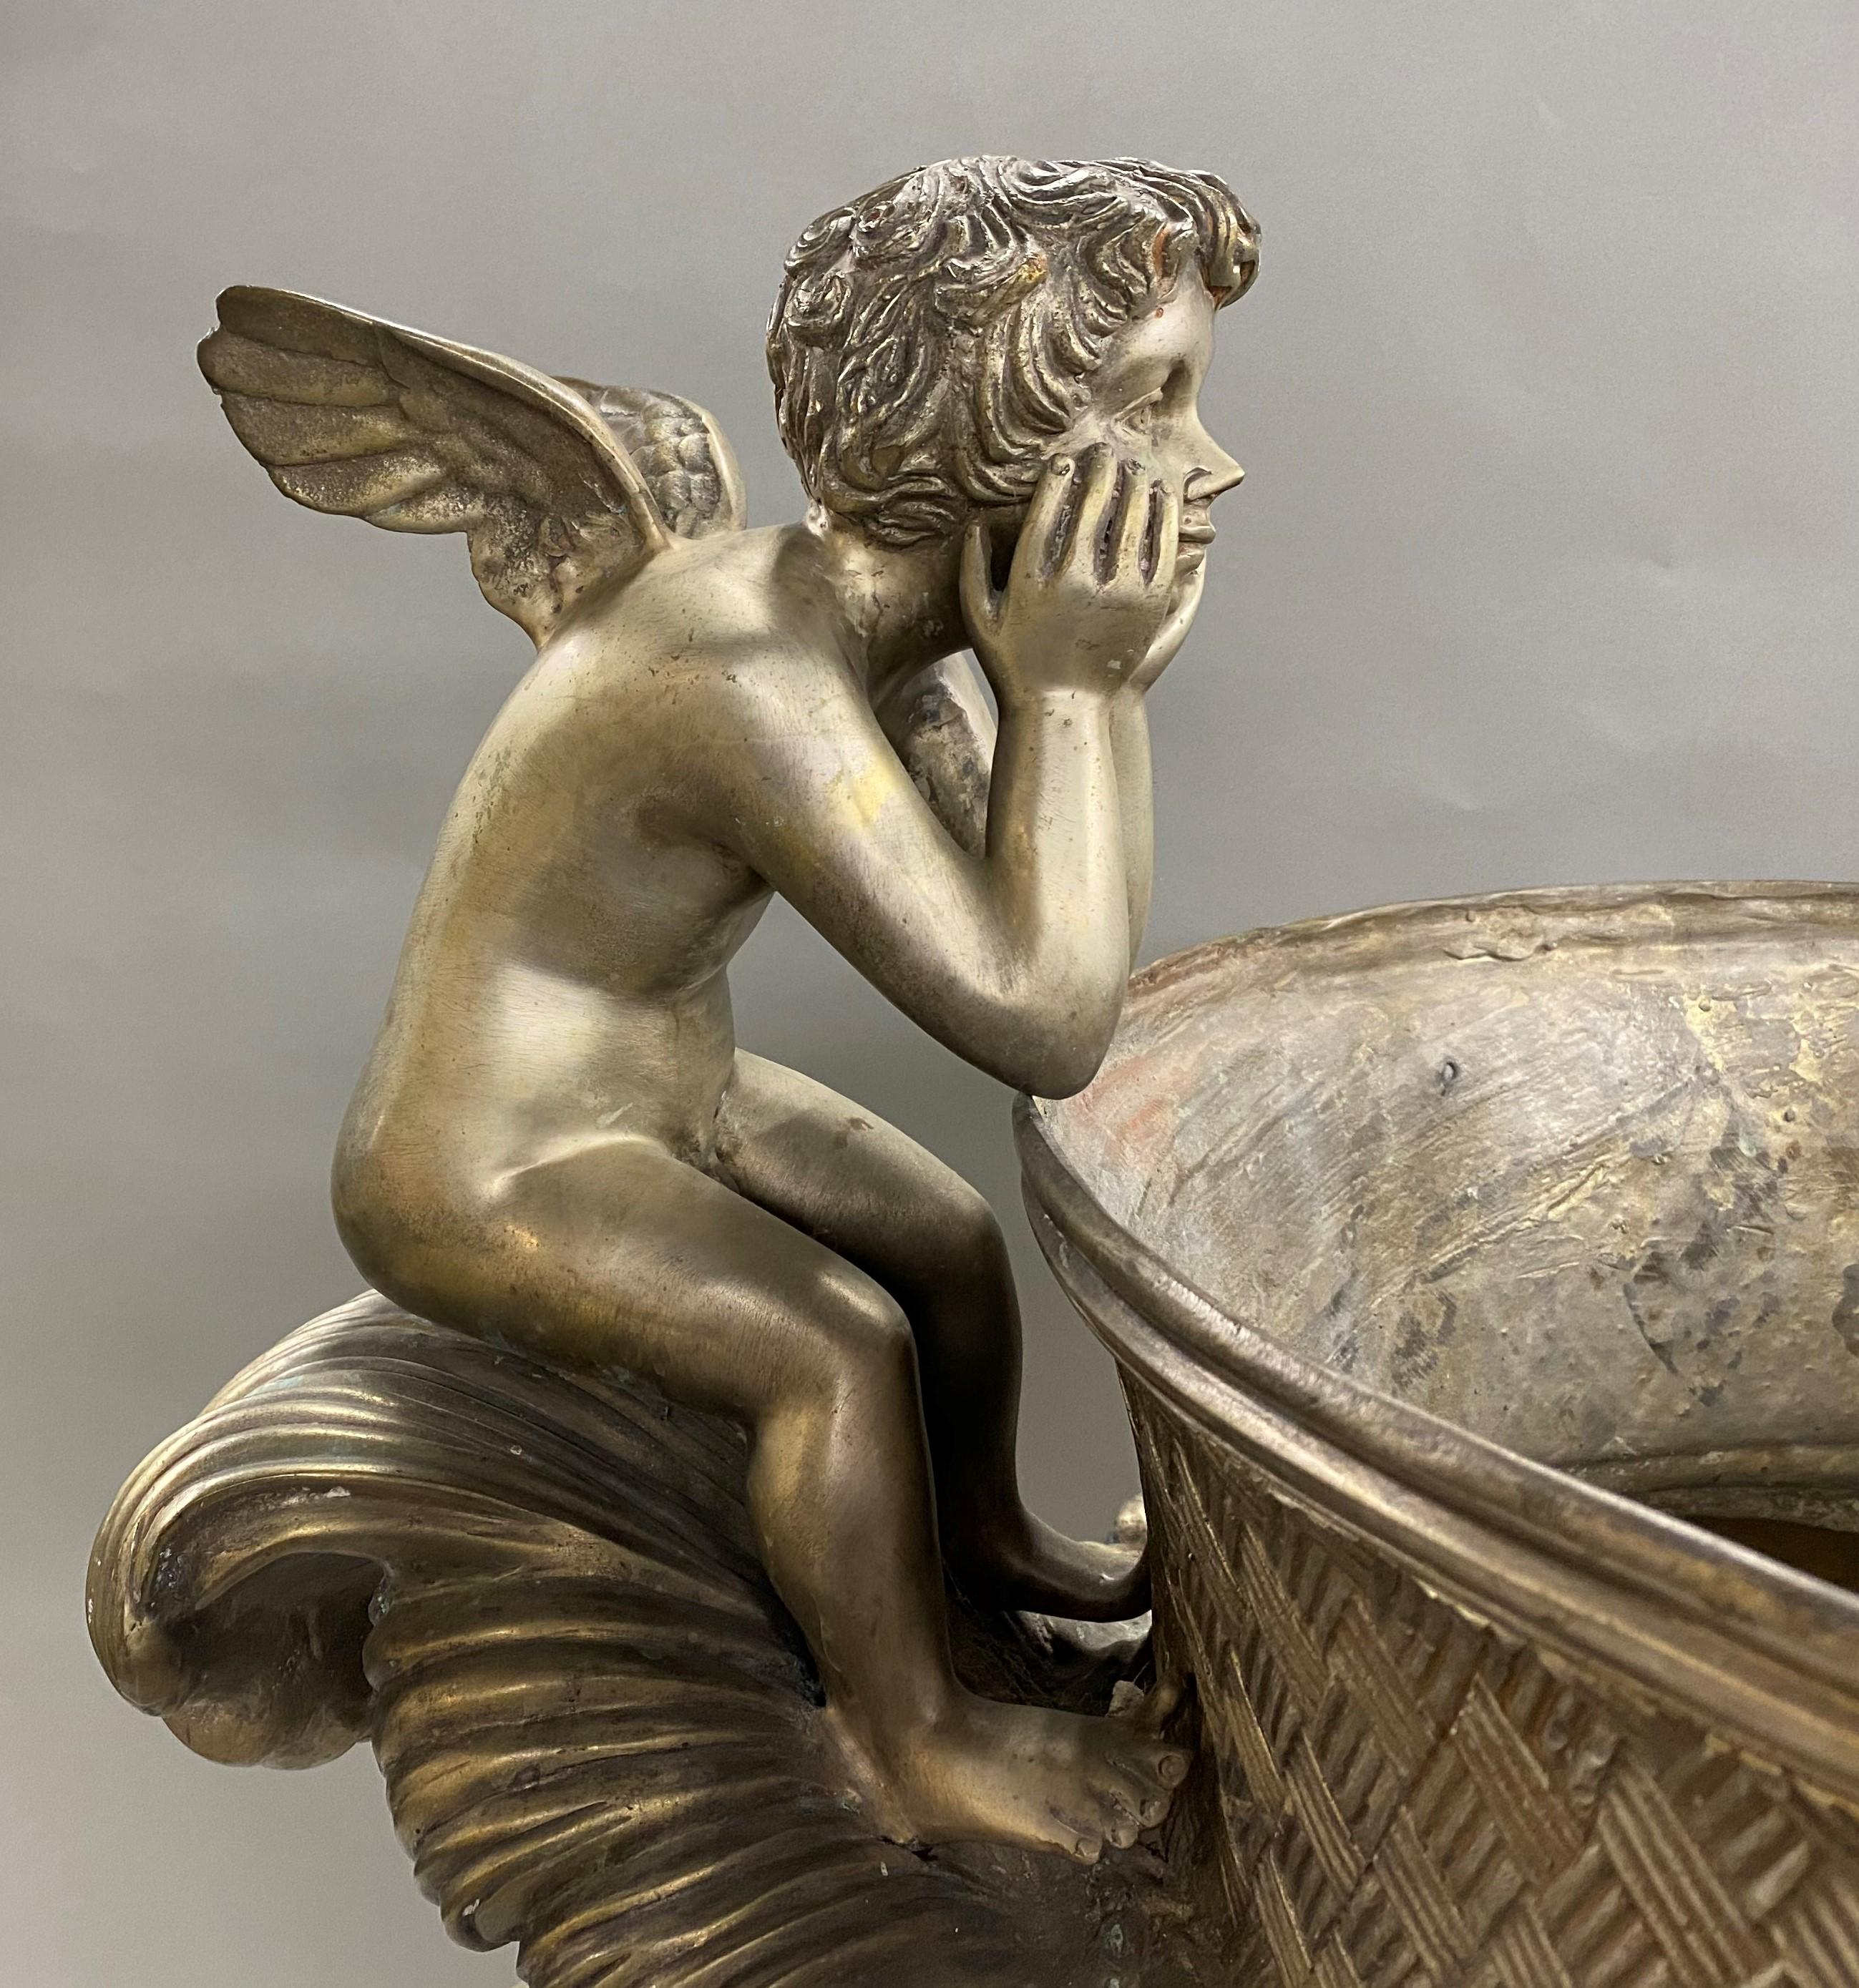 A fine silvered metal garden urn in a classic form with two winged putti seated along its woven decorated rim above lion head handles, the sides adorned with floral garland, and a foliate decorated round base. The urn dates to the 20th century and